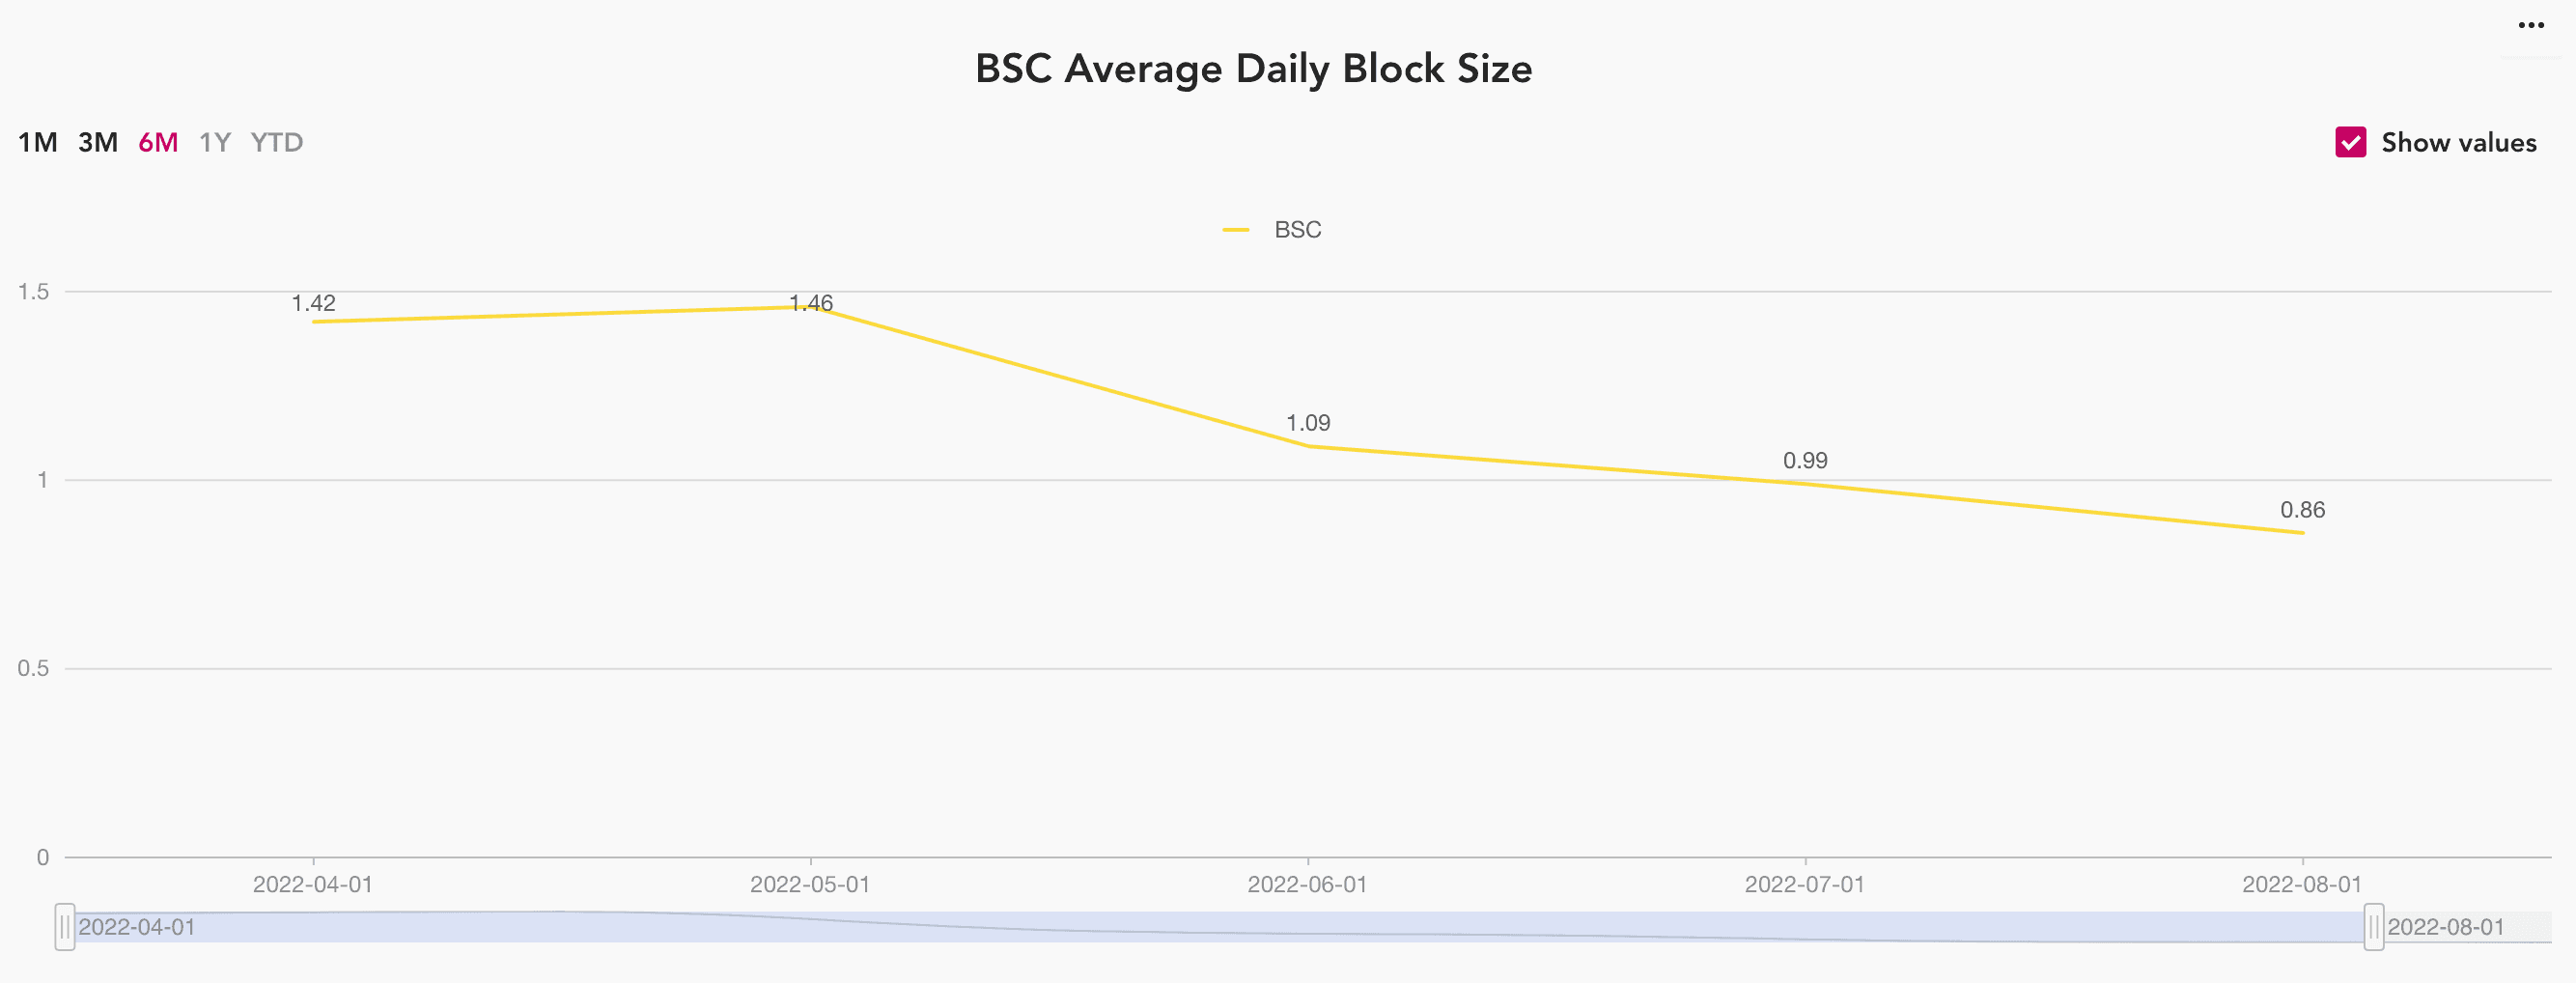 BSC average daily block size